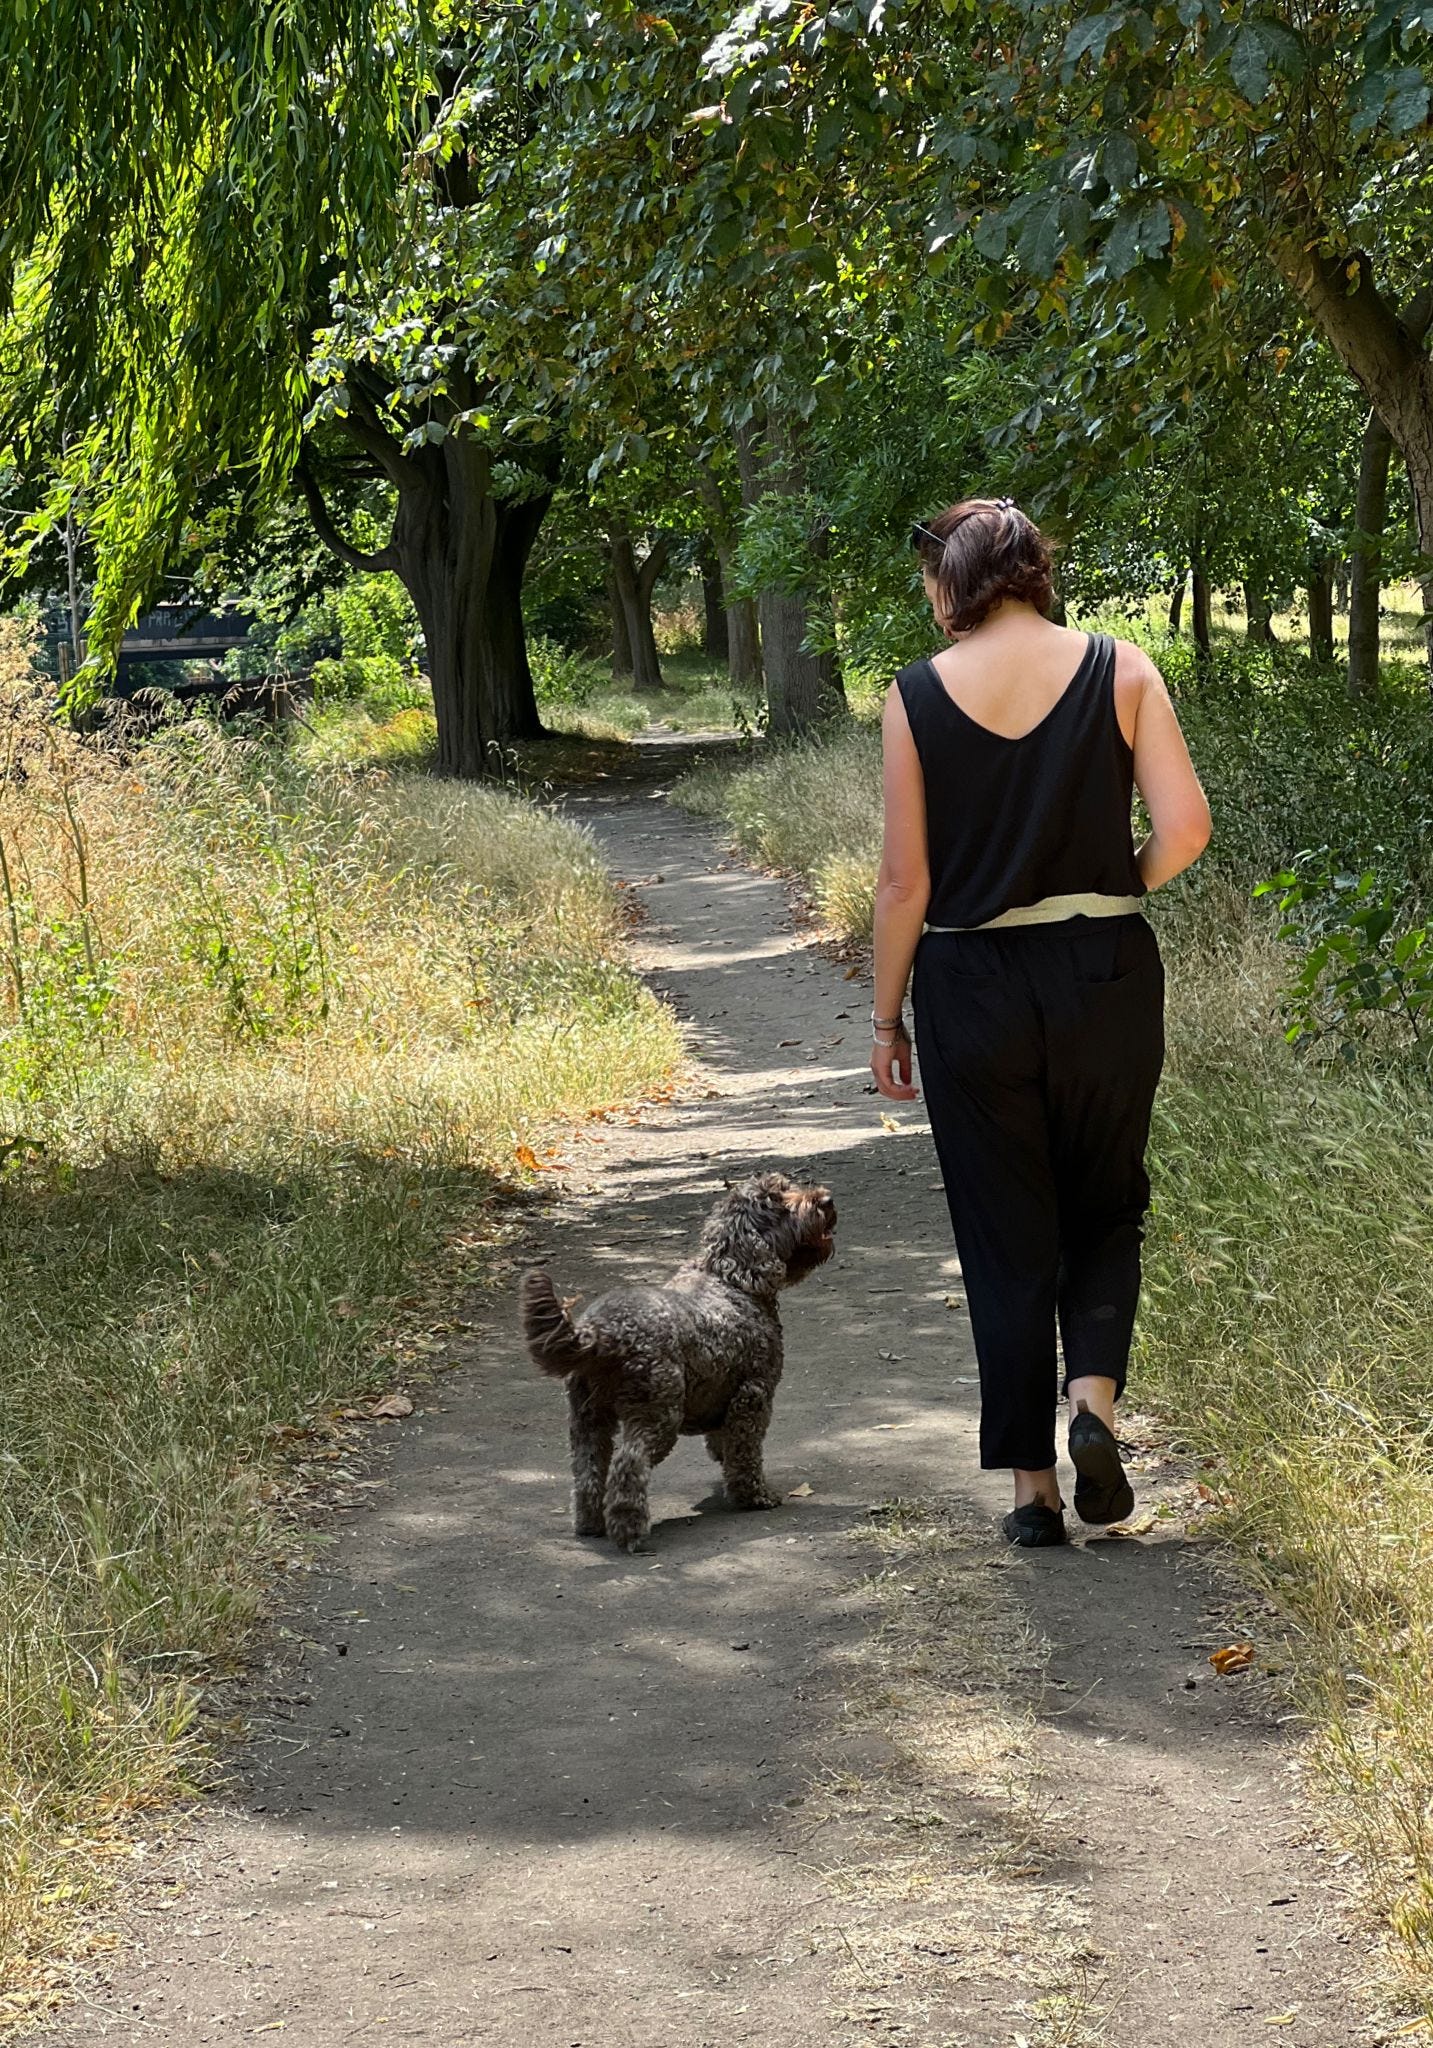 A woman and a dog walk along a mud path through some trees